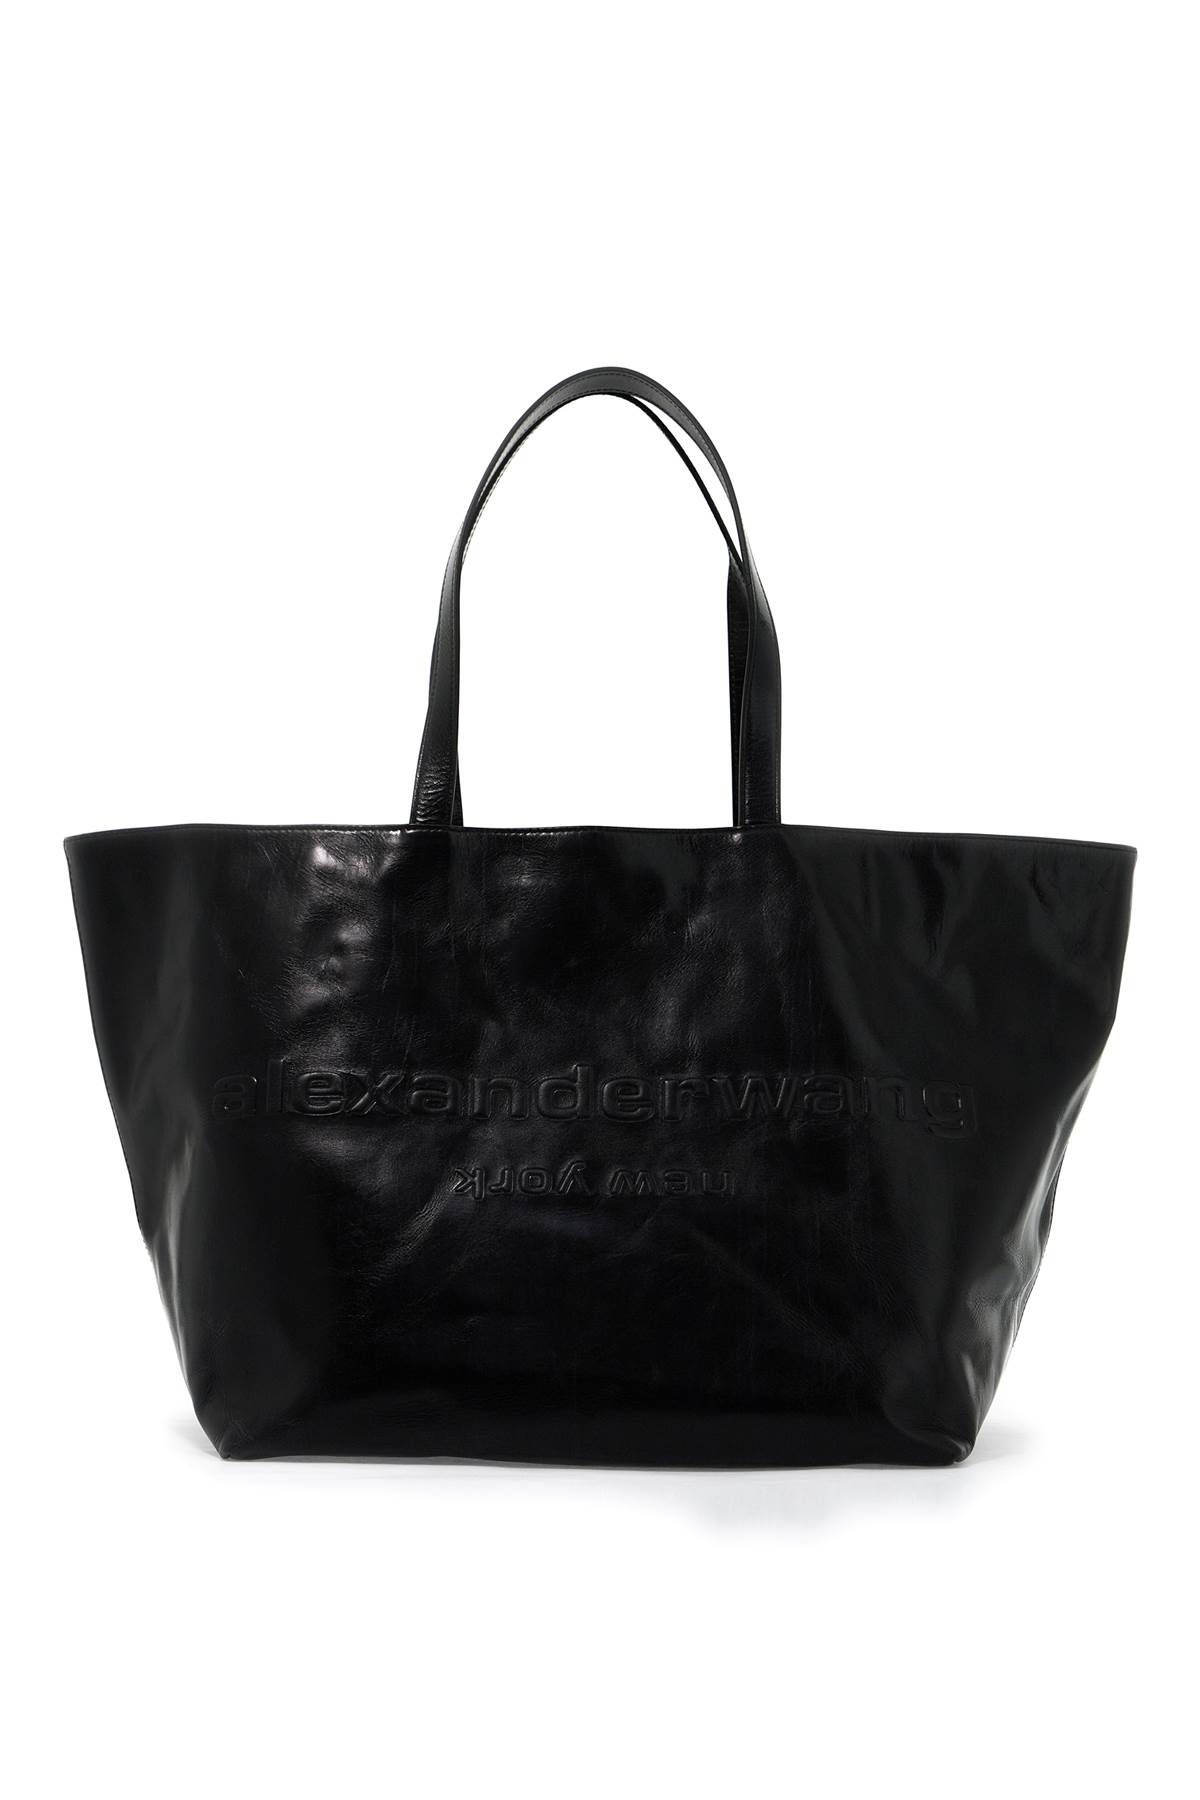 Alexander Wang ALEXANDER WANG leather punch tote bag with